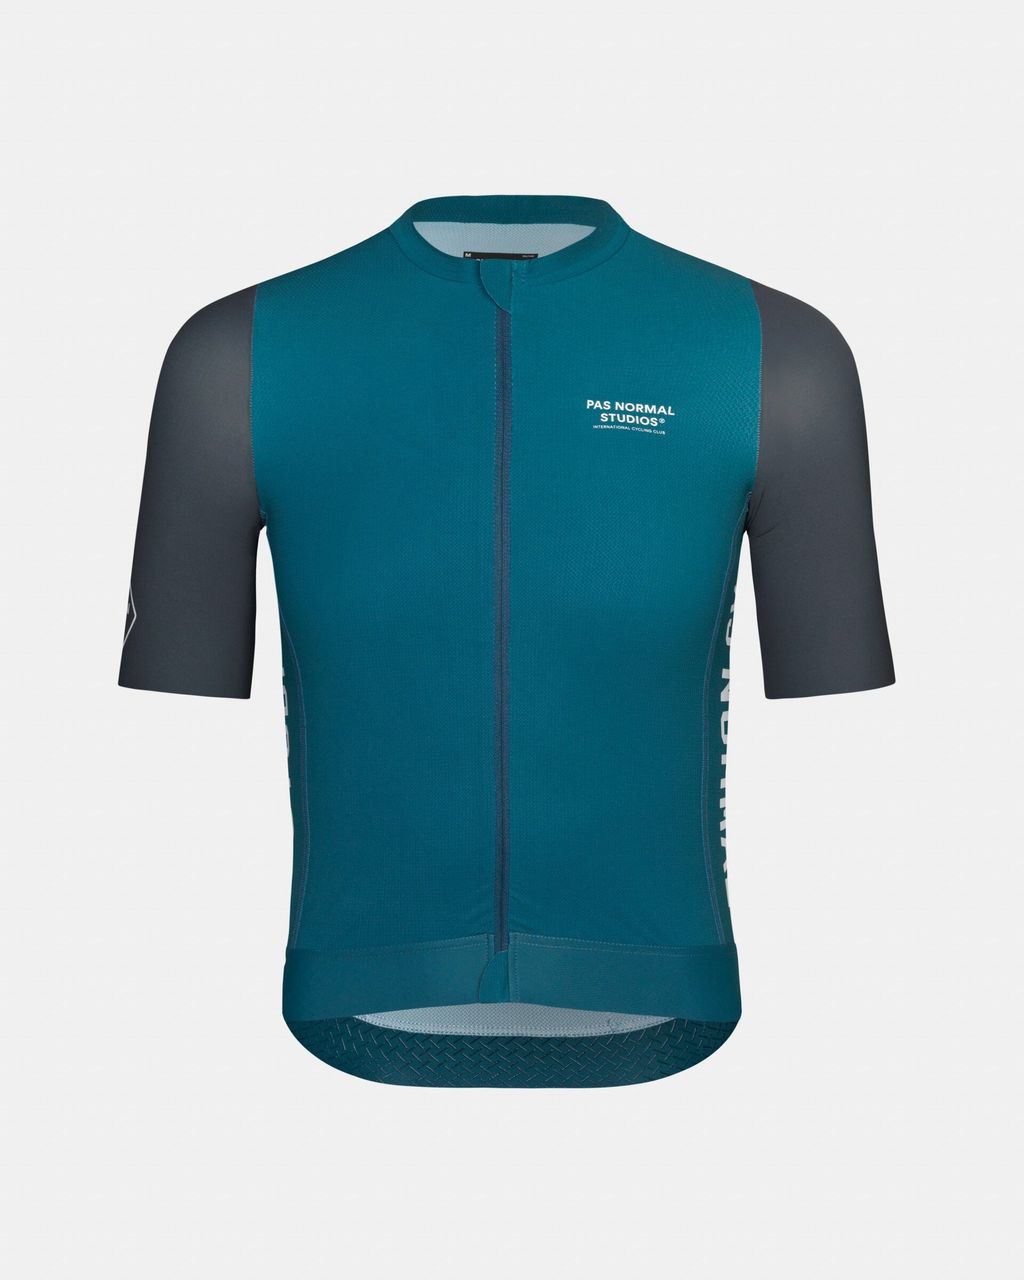 Mens-Solitude-Midsummer-SS-Jersey_Classic-Blue-Sleeve_Front-pdp-page